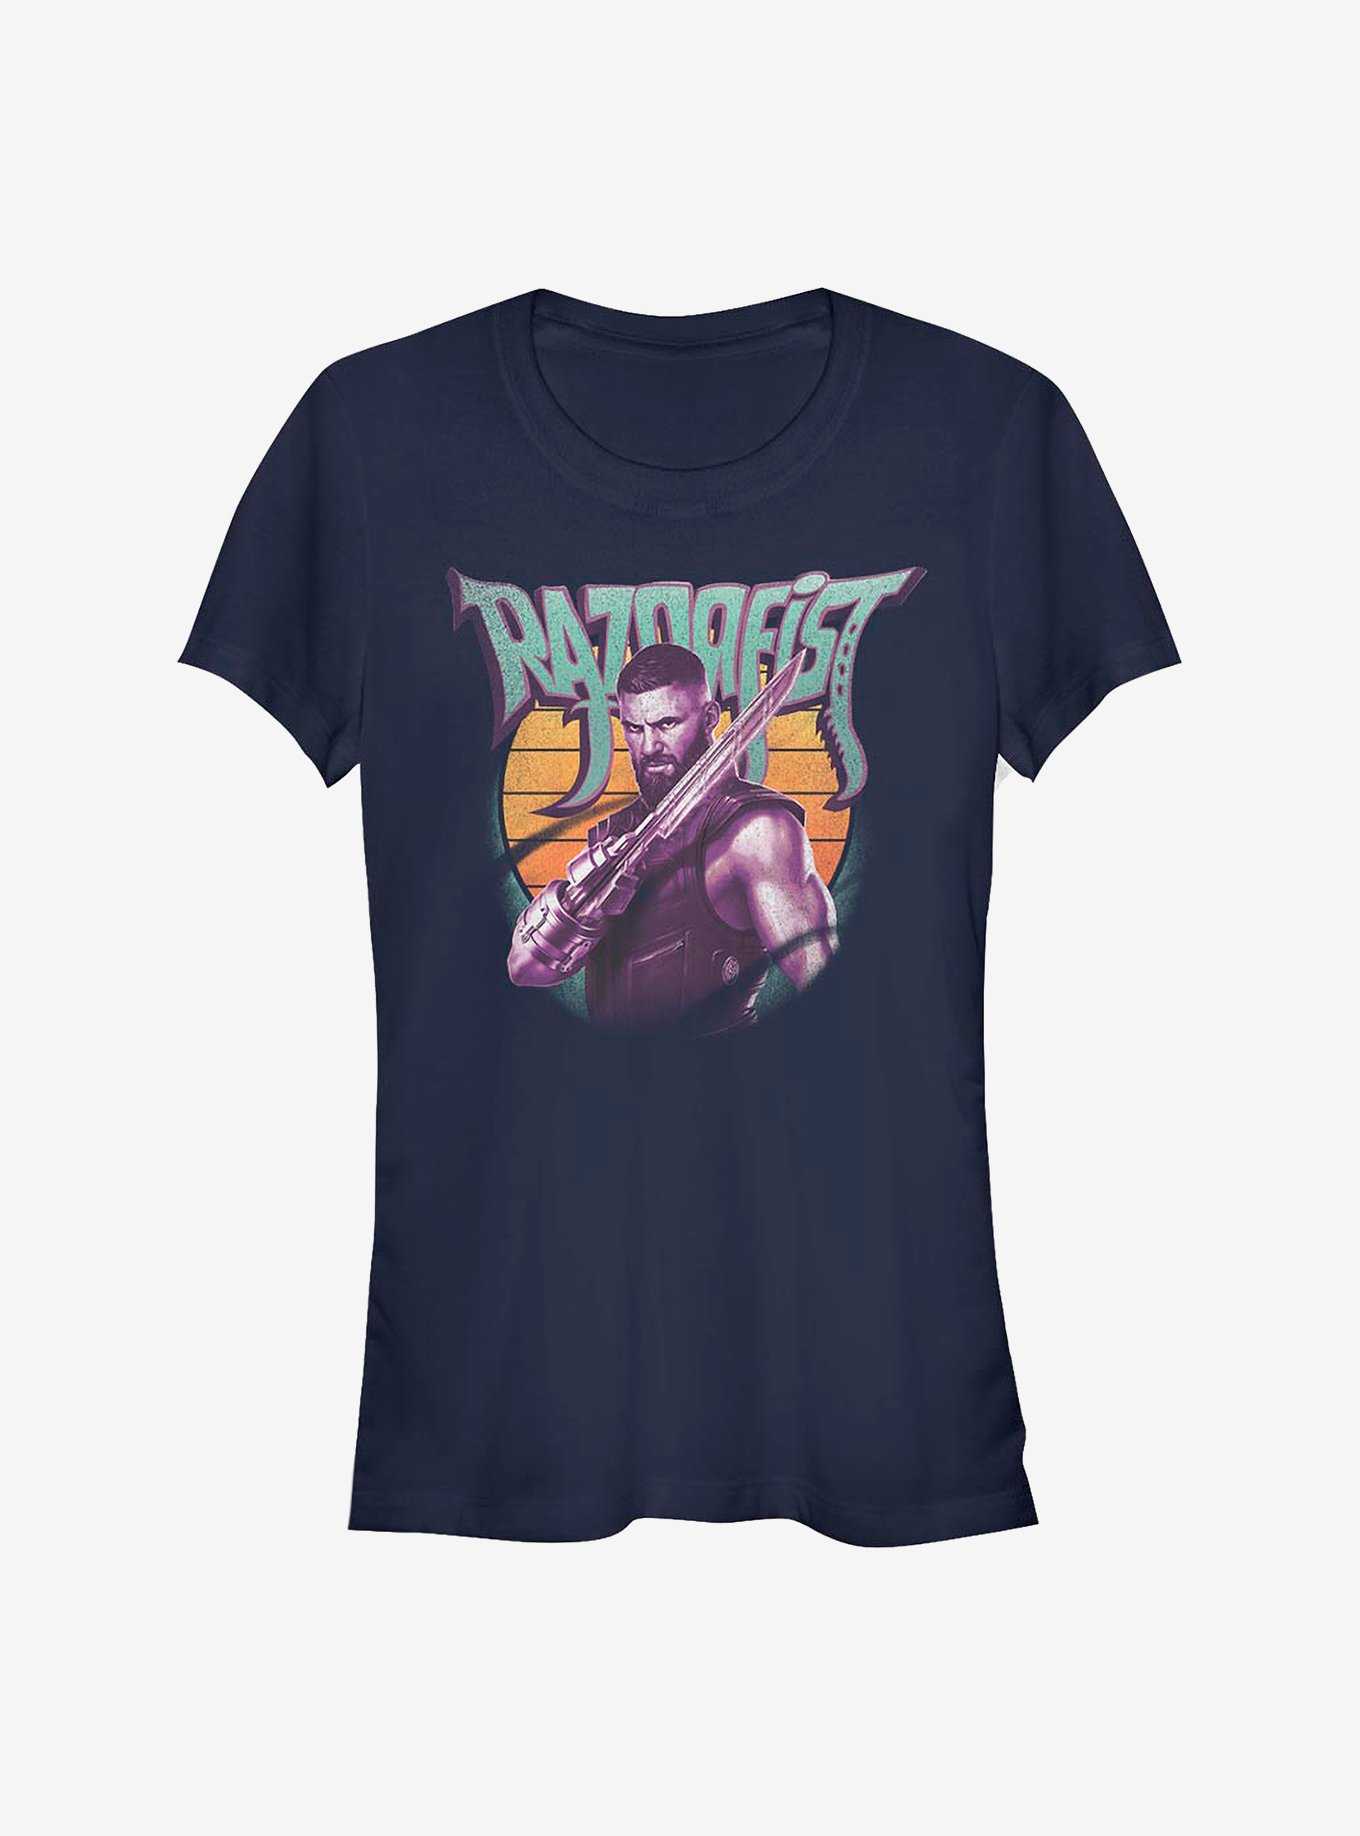 Marvel Shang-Chi And The Legend Of The Ten Rings Razorfist Sunset Girls T-Shirt, , hi-res